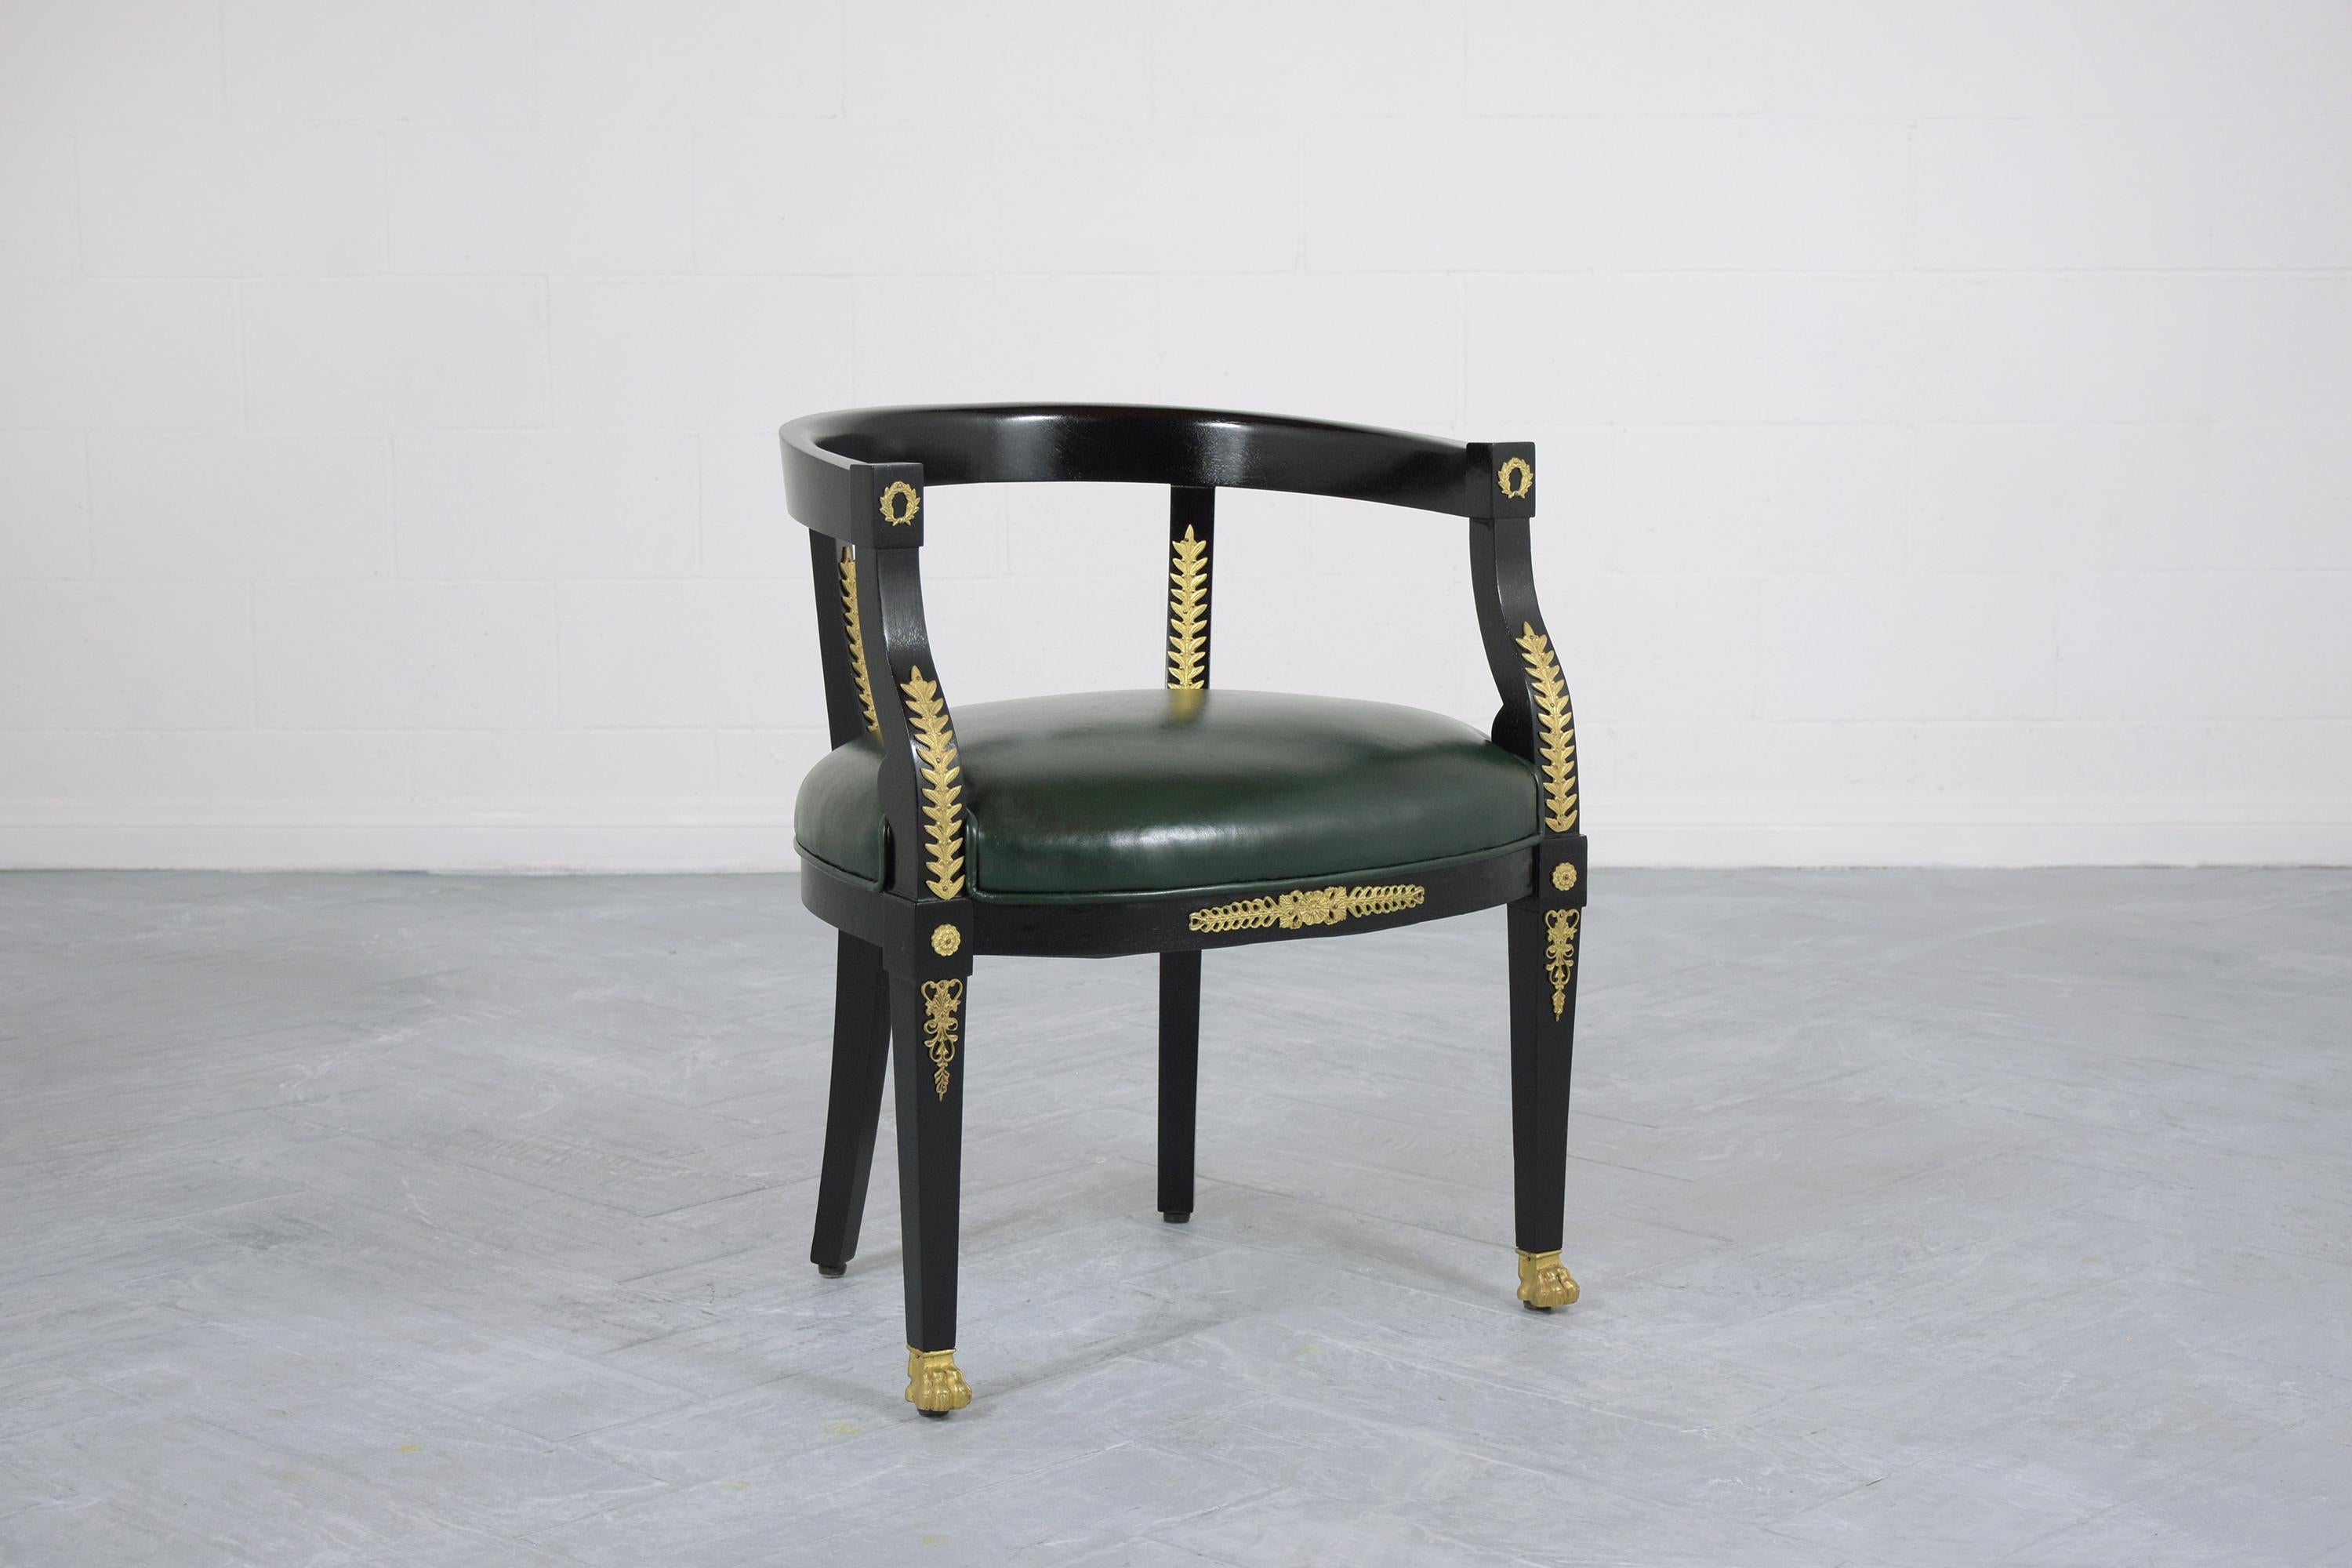 This French 19th-century leather armchair is made out of mahogany wood and has been fully restored by our team of expert craftsmen. The armchair has been professionally restained in ebonized color with a lacquered finish, features finely carved